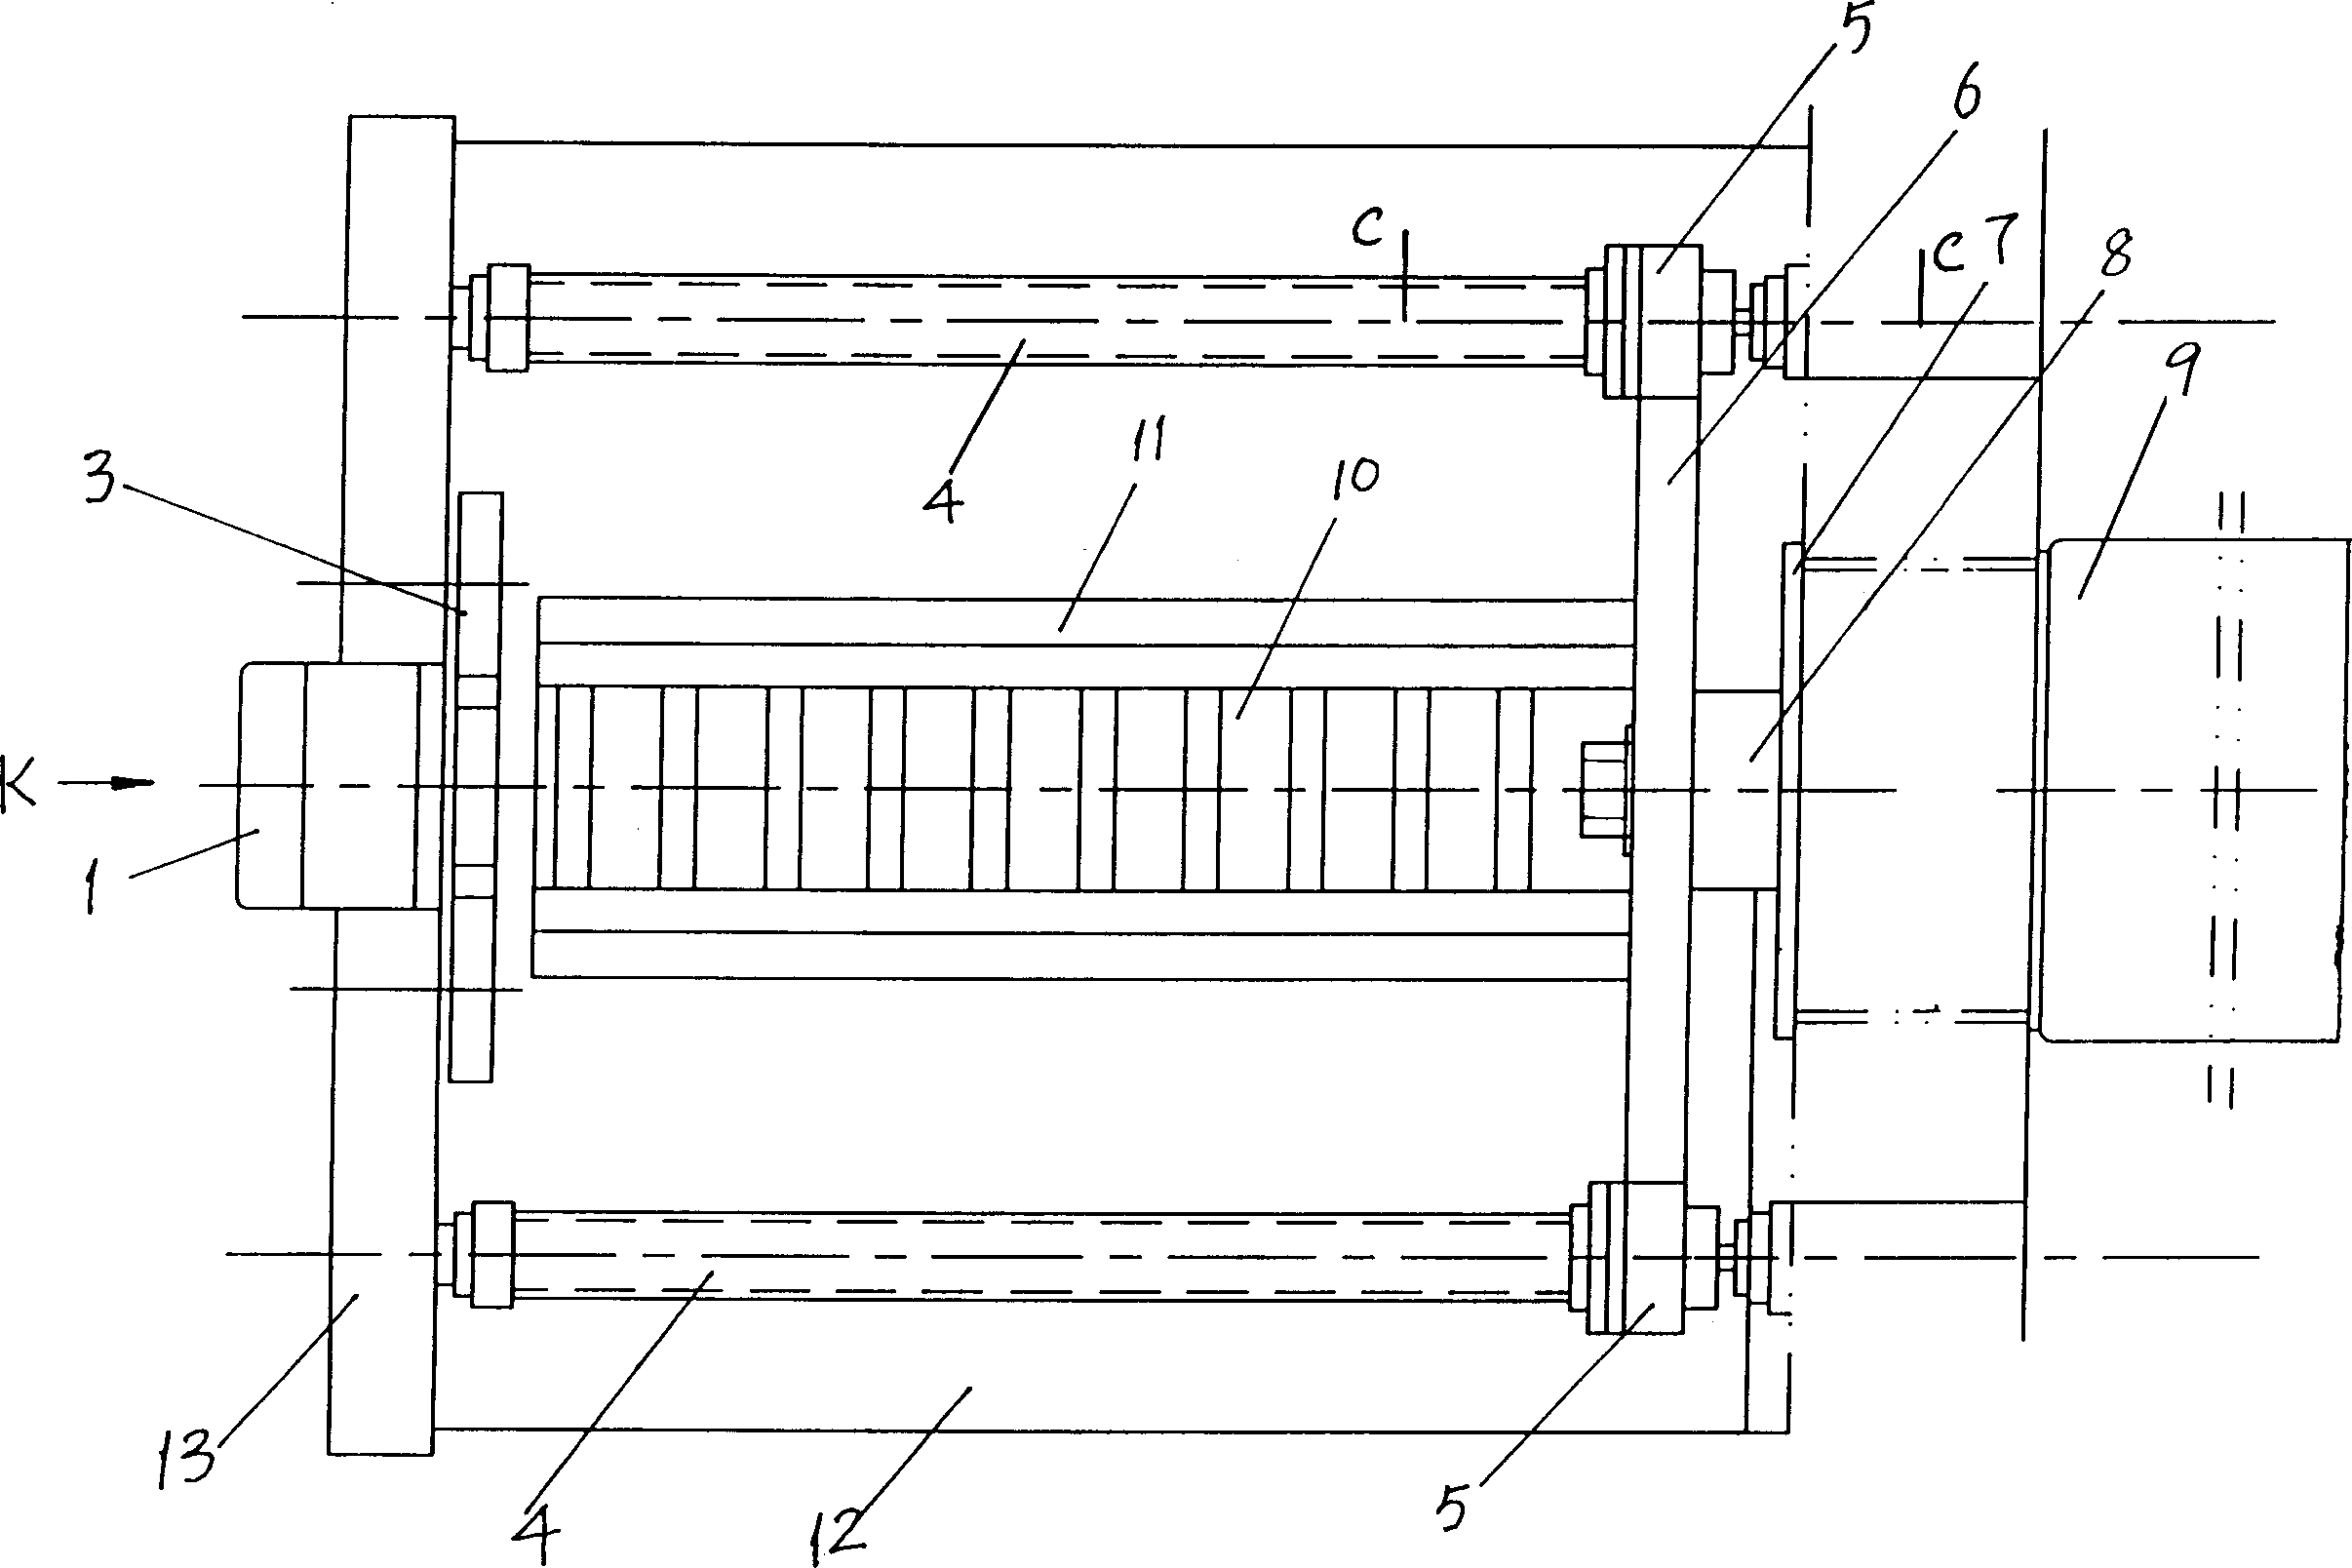 Traction system of bending machine with two rollers